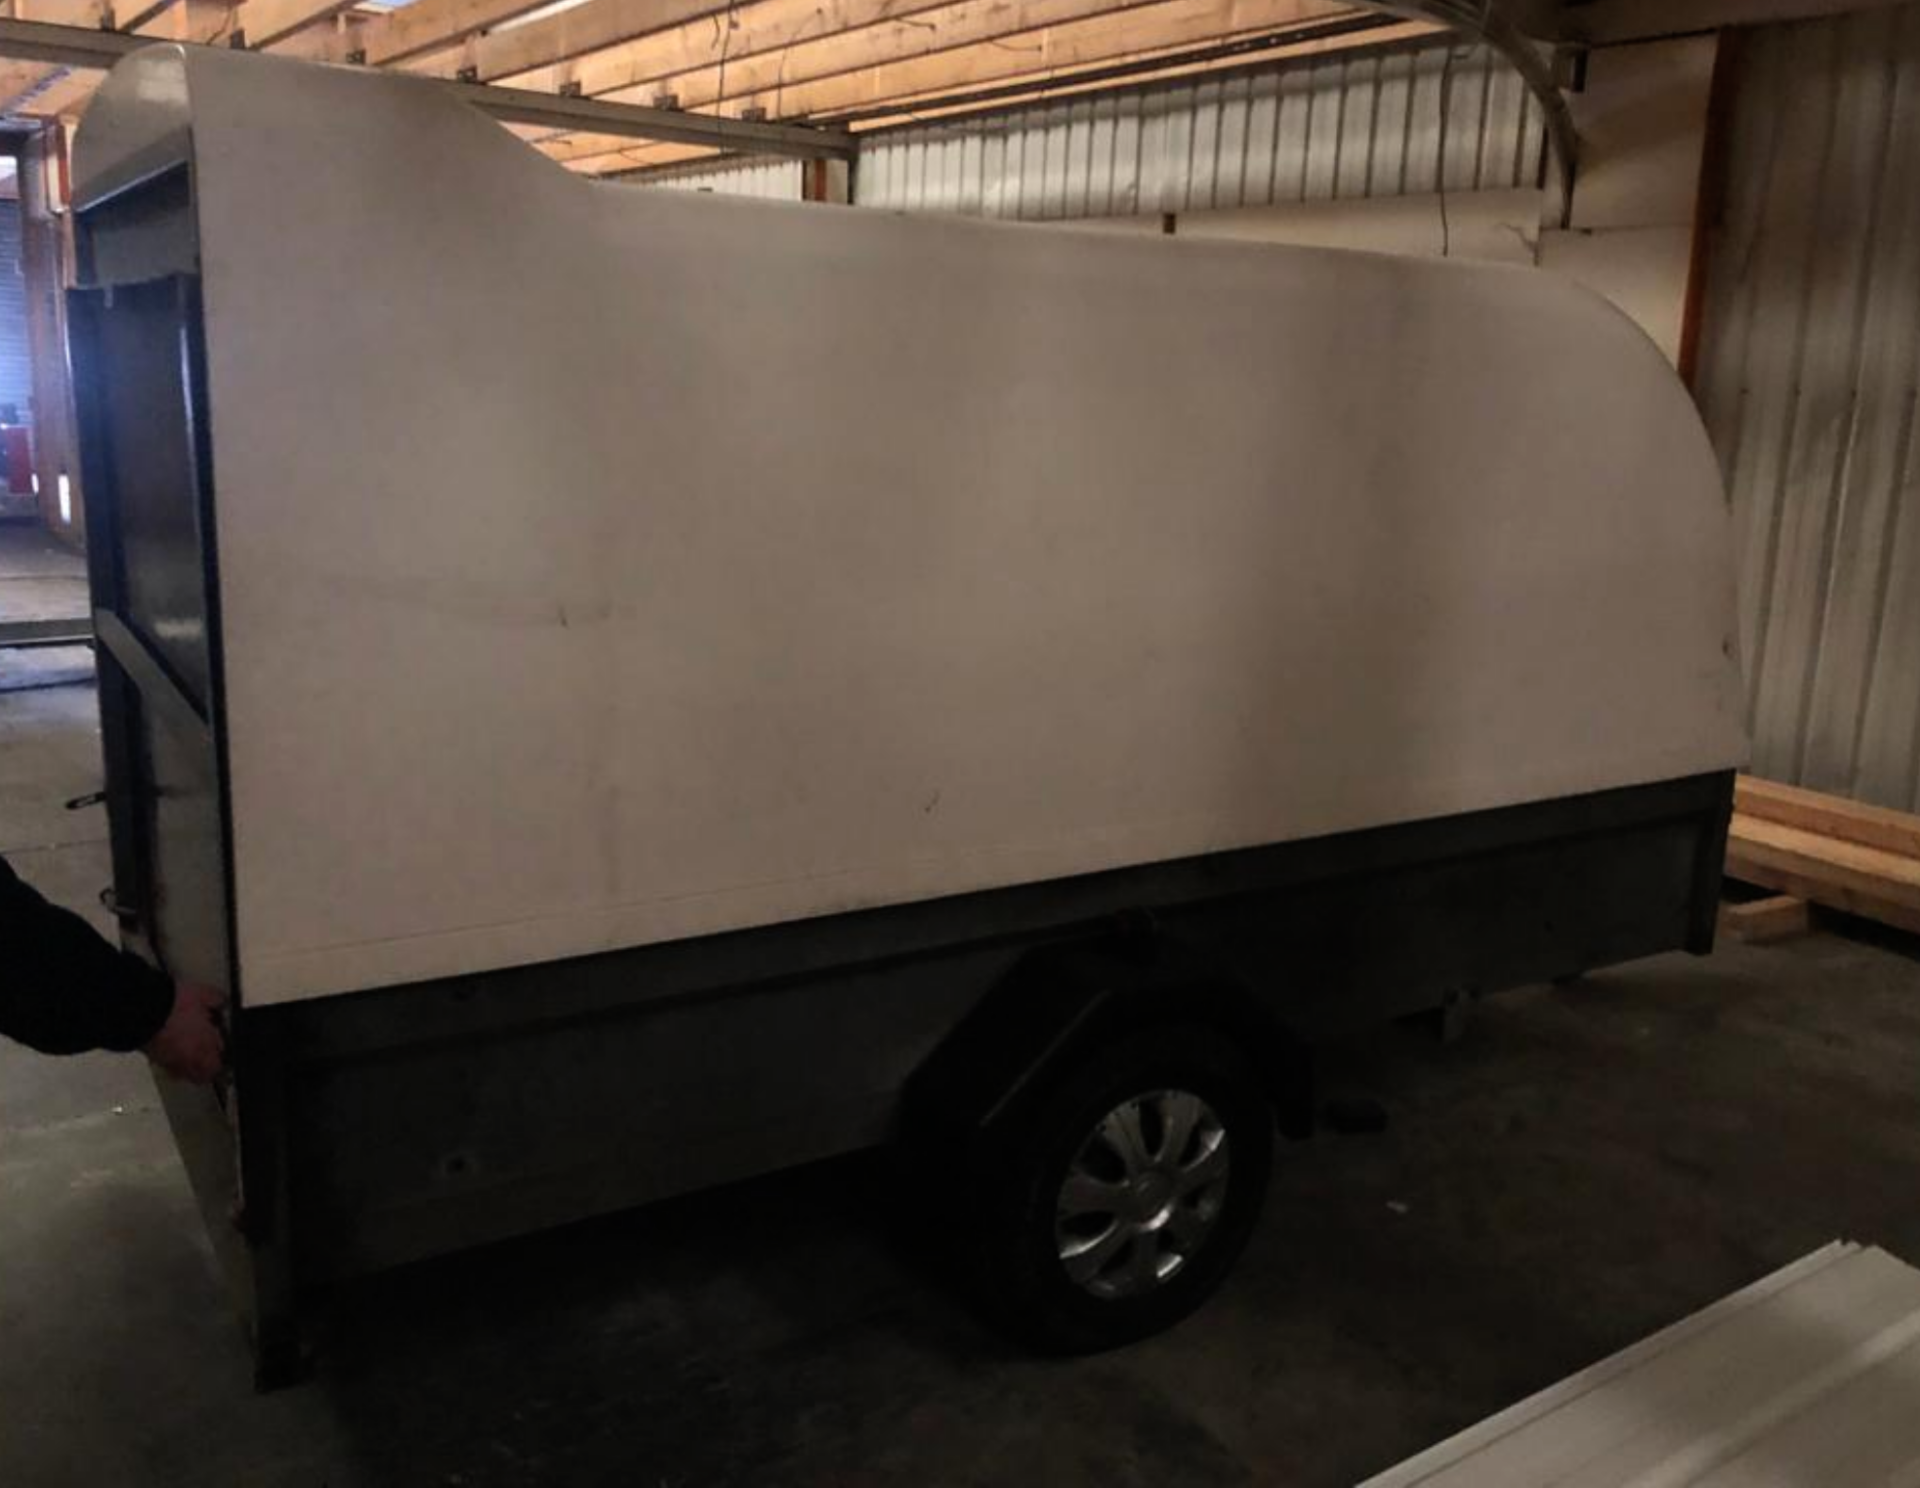 SPECIALIST SINGLE AXLE TOWABLE MOTORBIKE TRANSPORT COVERED TRAILER RAMP *PLUS VAT* - £1500 RESERVE! - Image 4 of 8